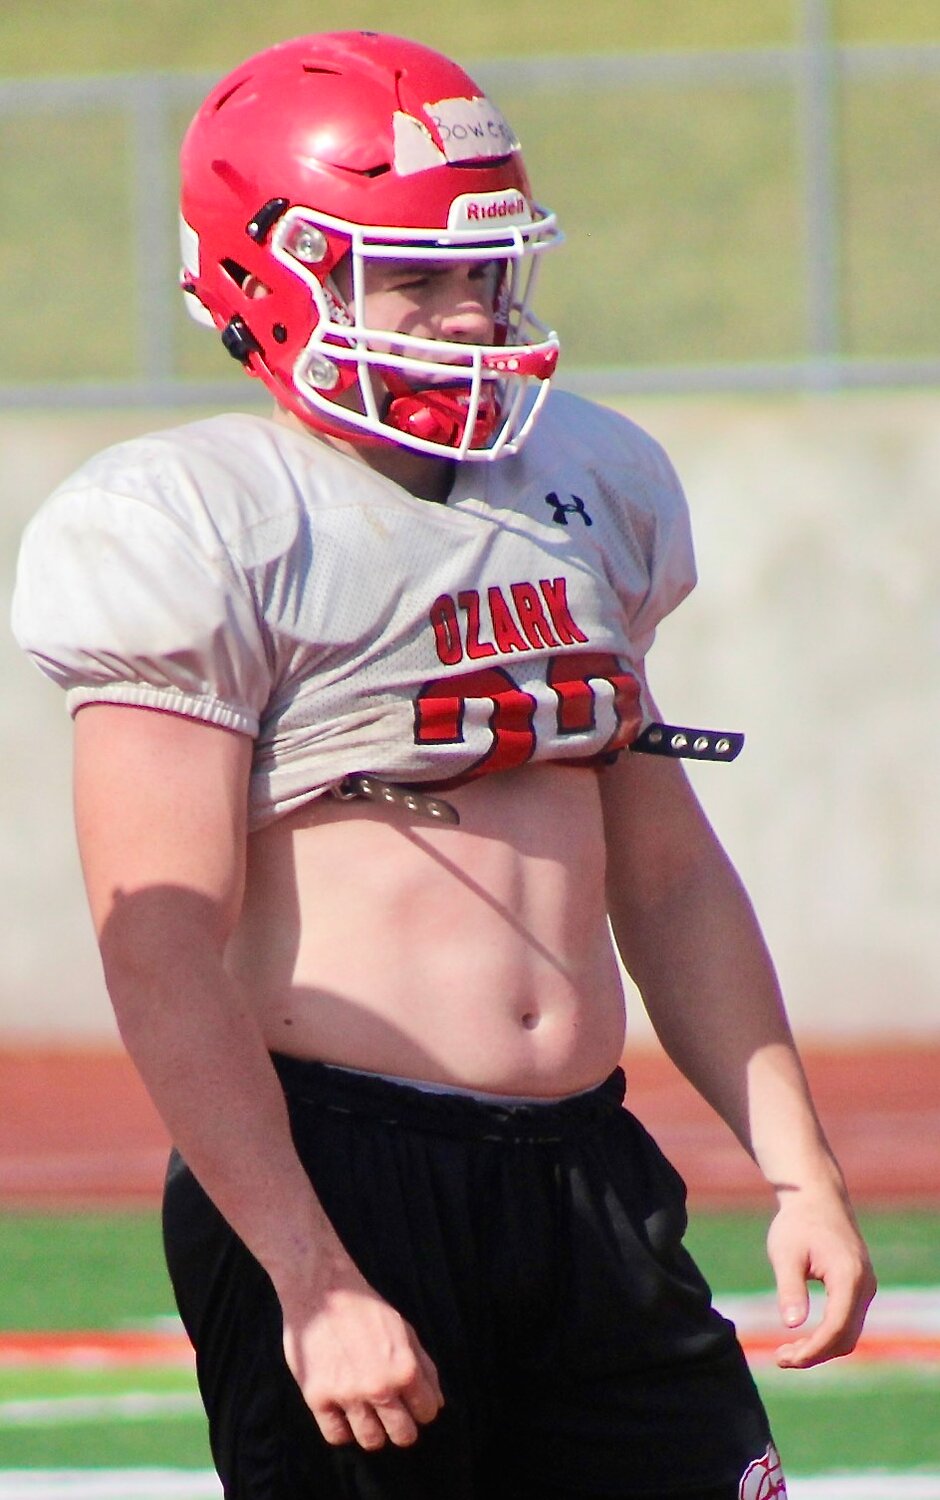 OZARK'S JACK BOWERS rushed for 471 yards as a sophomore two years ago.